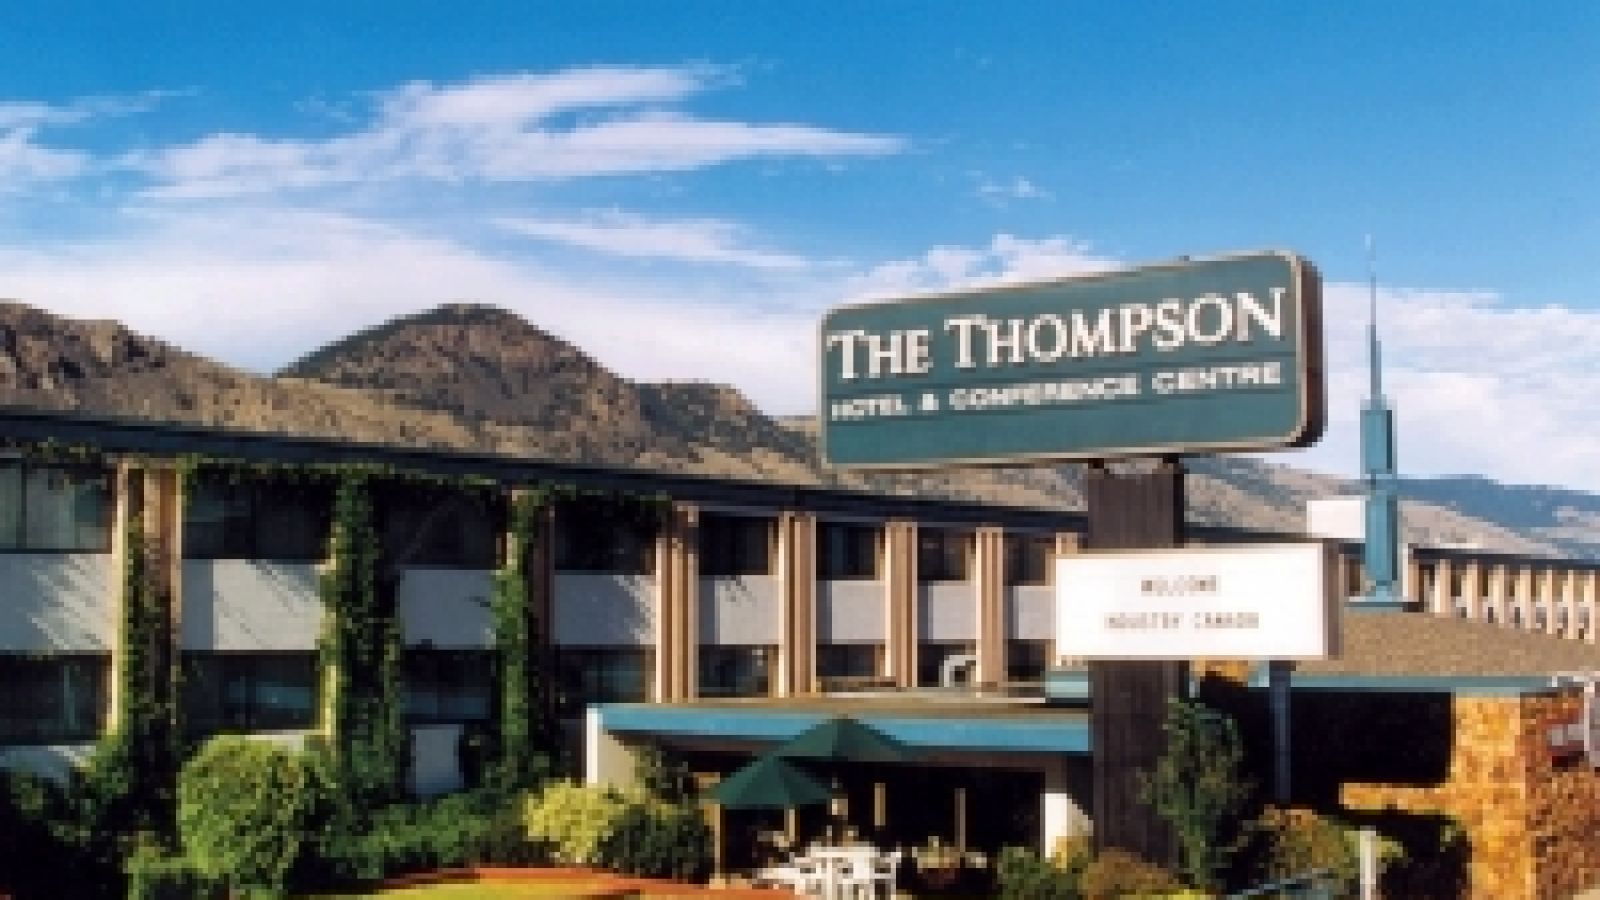 The Thompson Hotel and Conference Centre - Kamloops golf packages